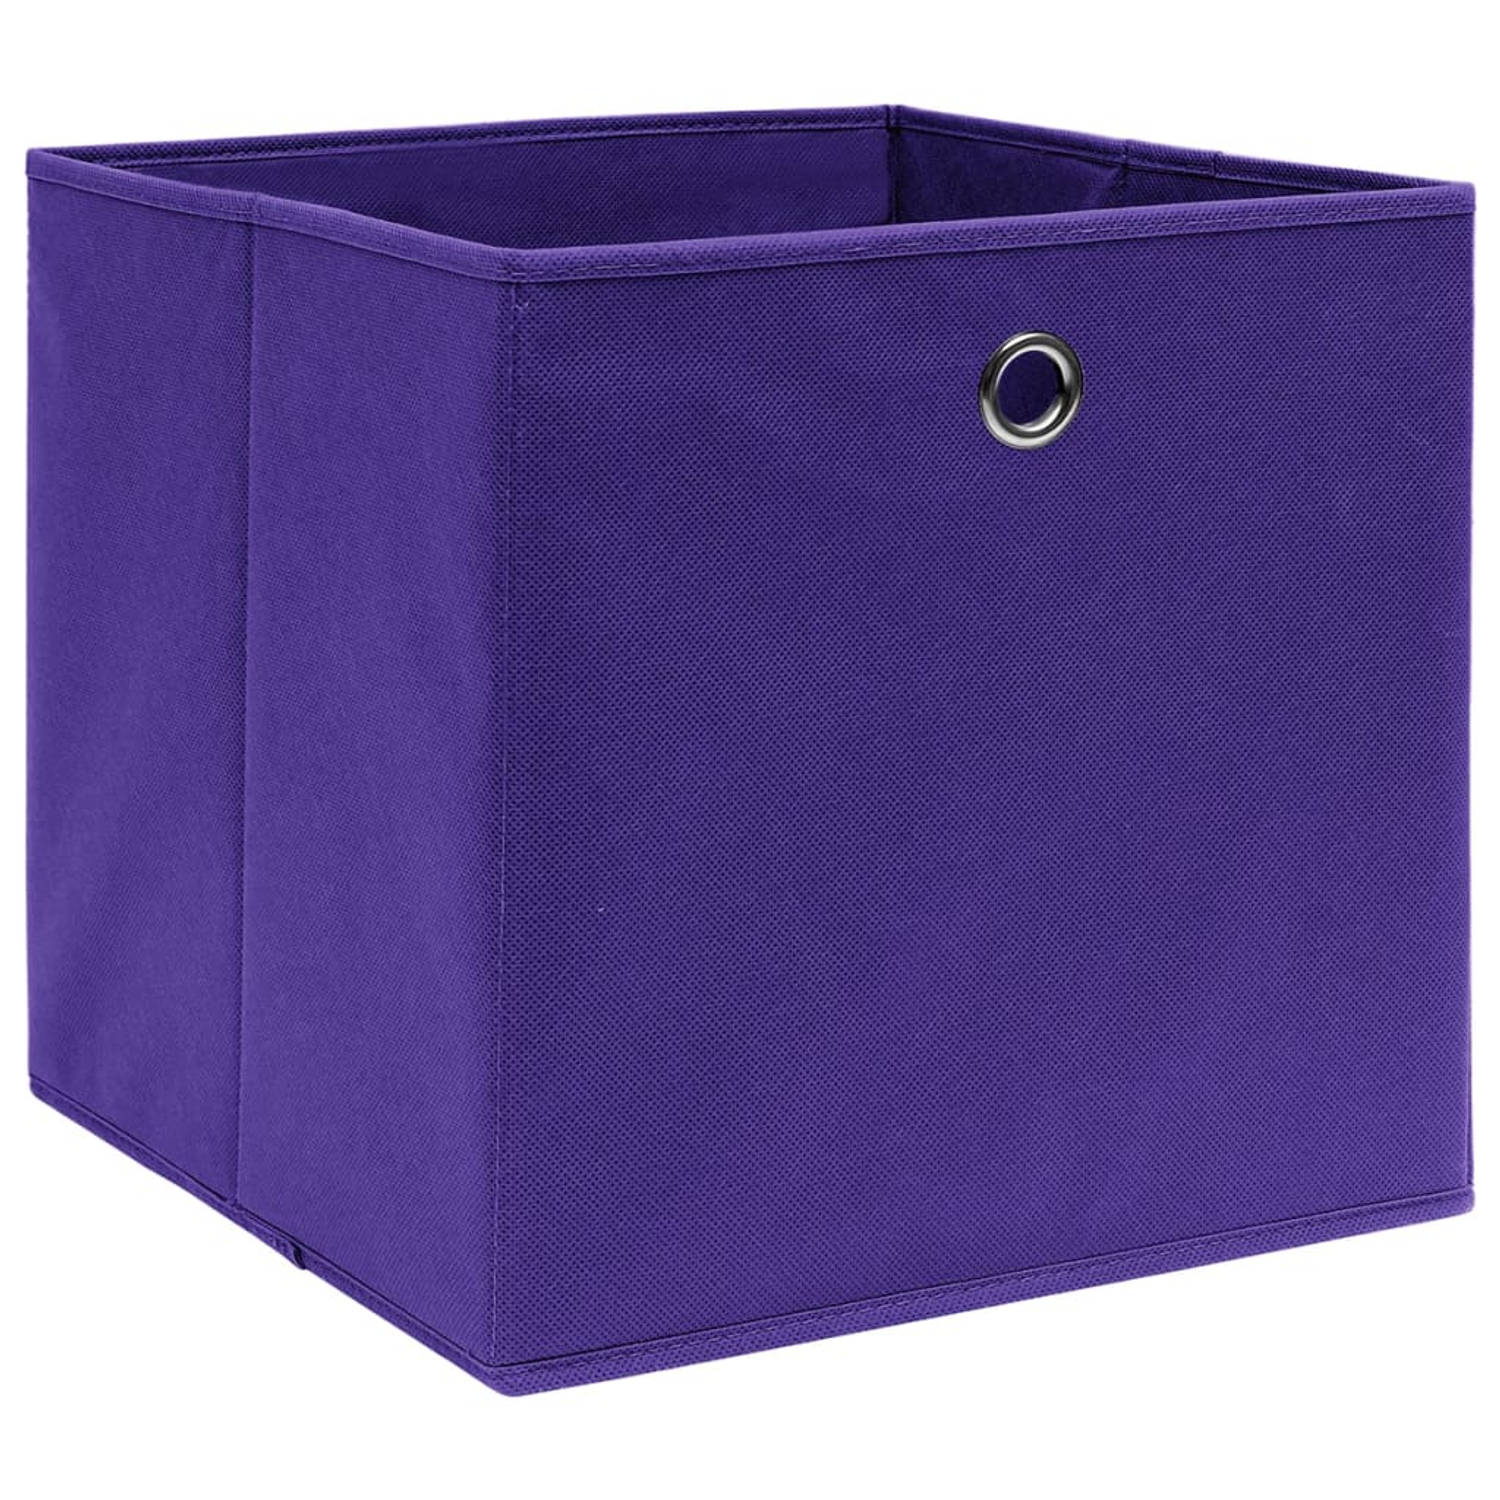 The Living Store Opbergboxen 4 st 28x28x28 cm nonwoven stof paars - Opberger